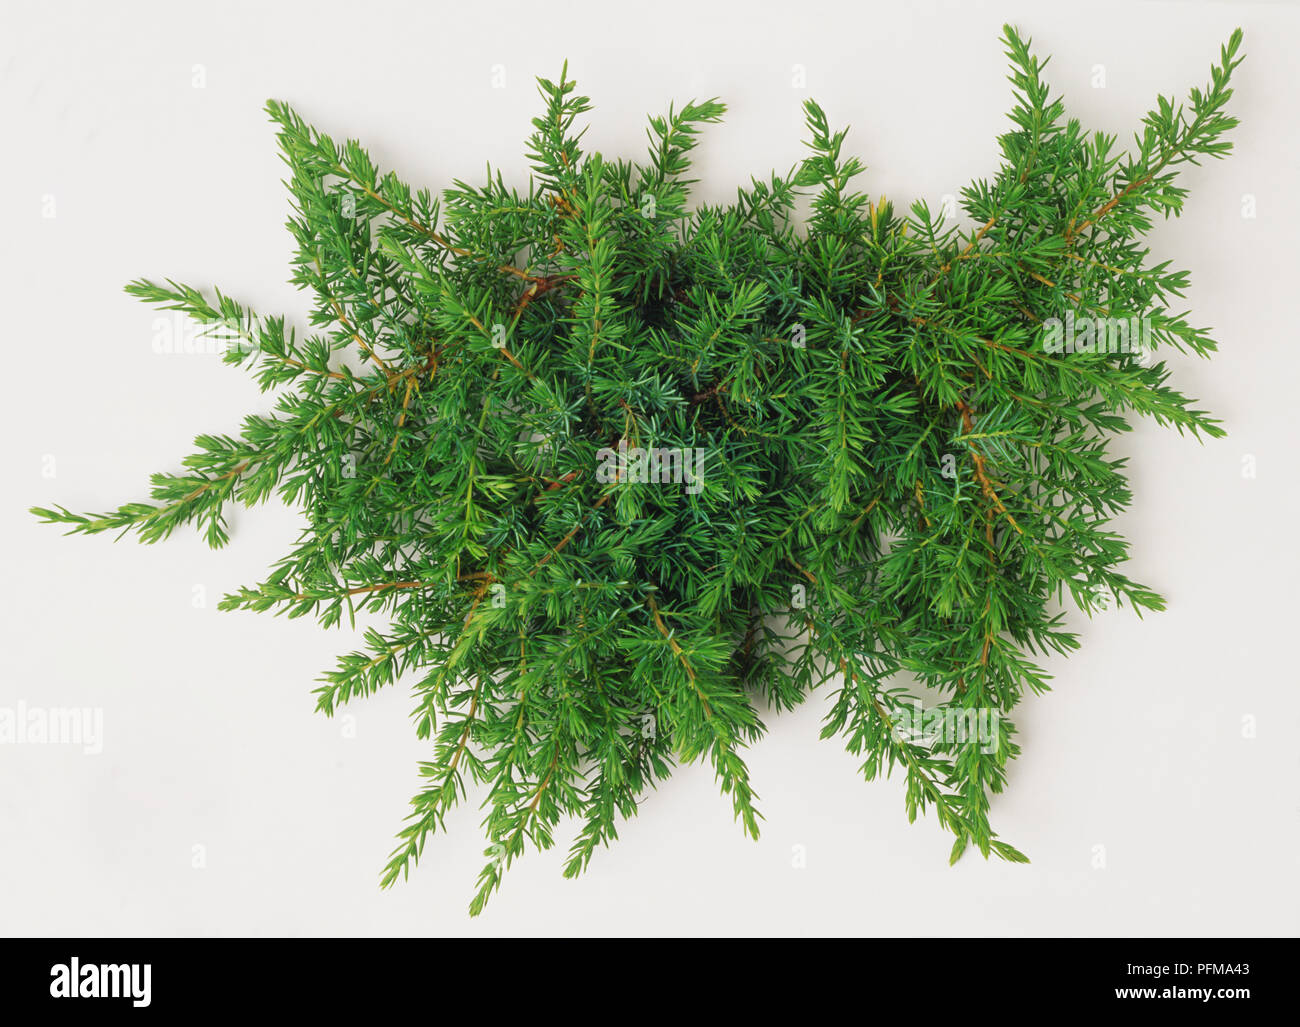 Juniperus communis 'Green Carpet', a prostrate Juniper which makes excellent ground cover. Its branches are crowded with prickly, needle-like, bright green leaves. Stock Photo